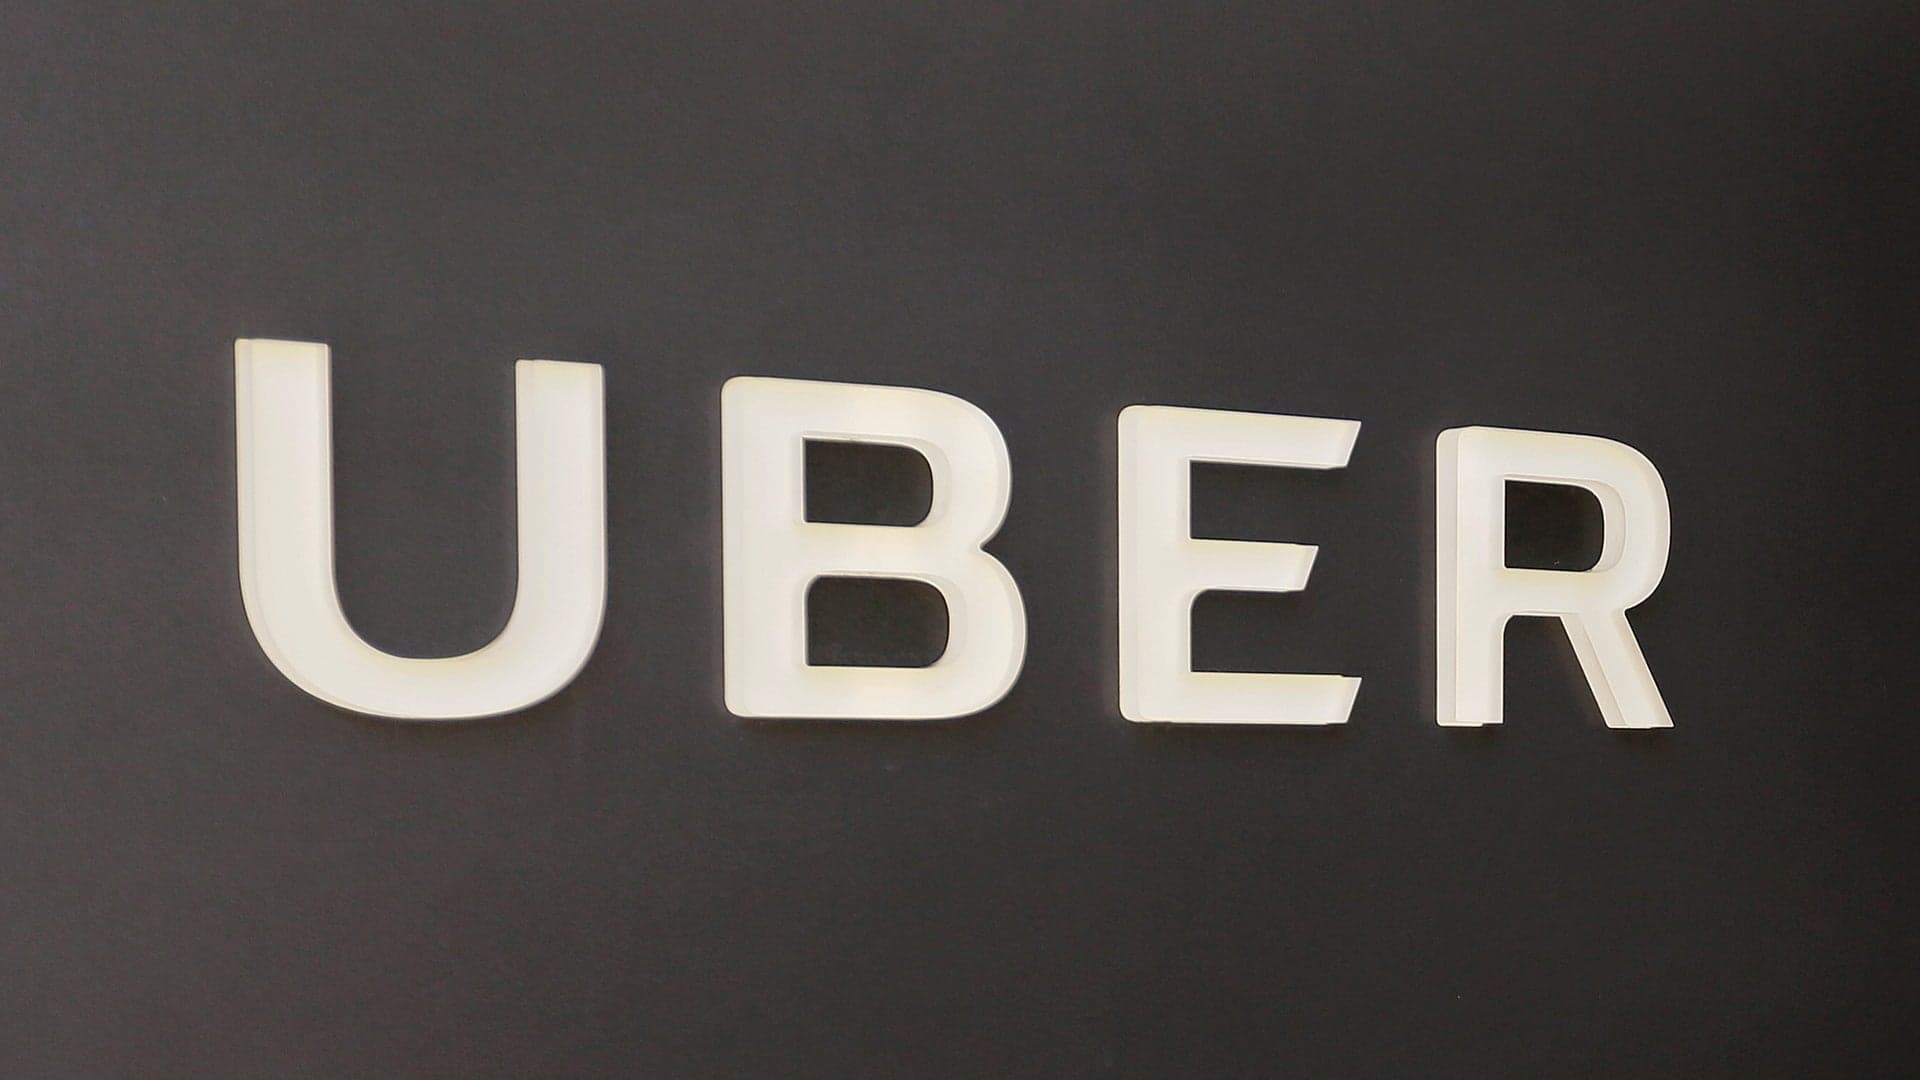 Uber Leadership Is Mostly White Men, Diversity Report Reveals